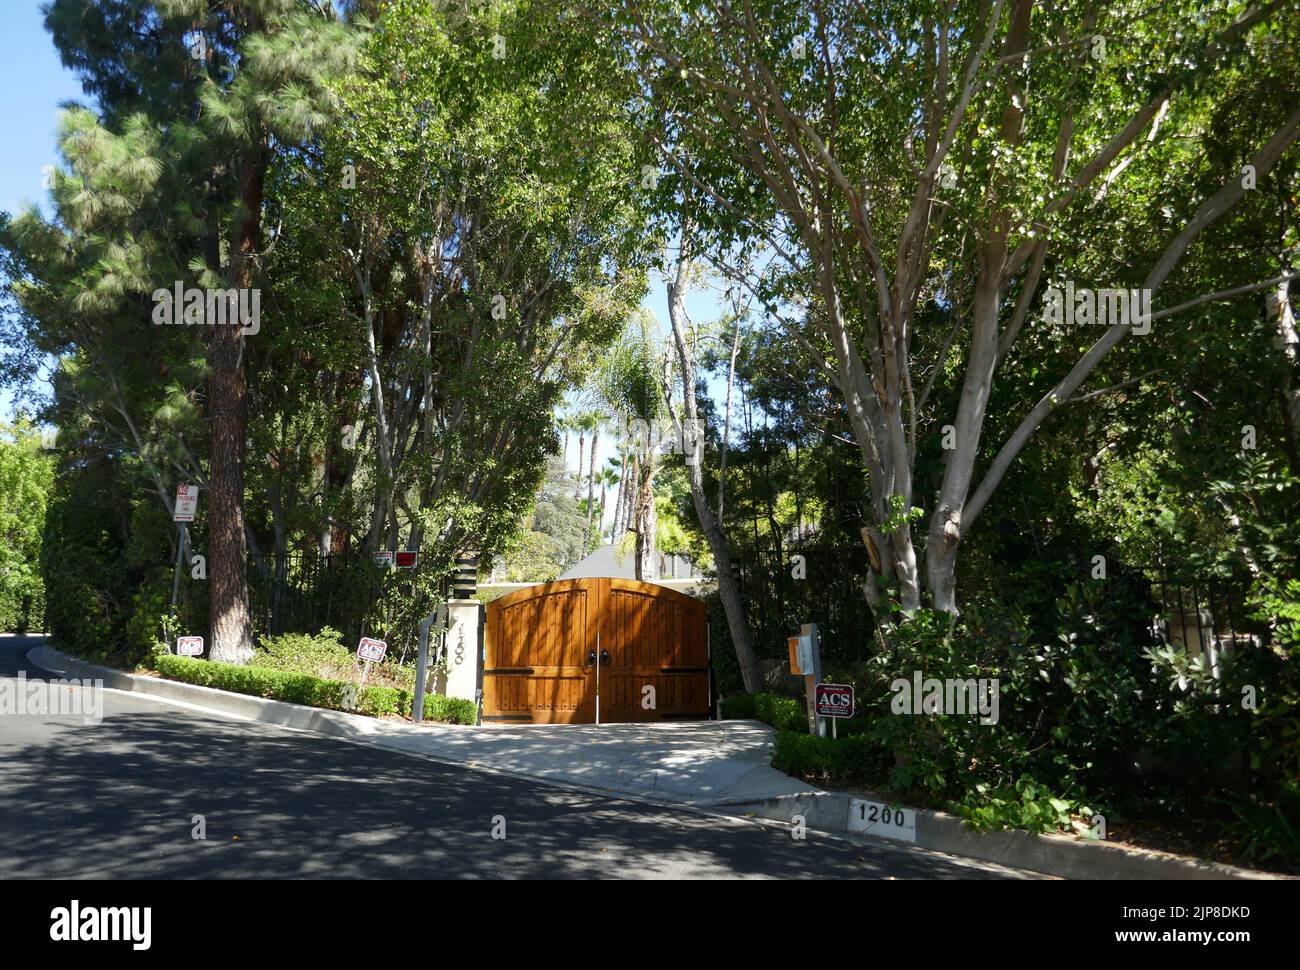 Beverly Hills, California, USA 15th August 2022 Singer Luther Vandross's Former Home/house at 1200 Chanruss Place on August 15, 2022 in Beverly Hills, California, USA. Photo by Barry King/Alamy Stock Photo Stock Photo